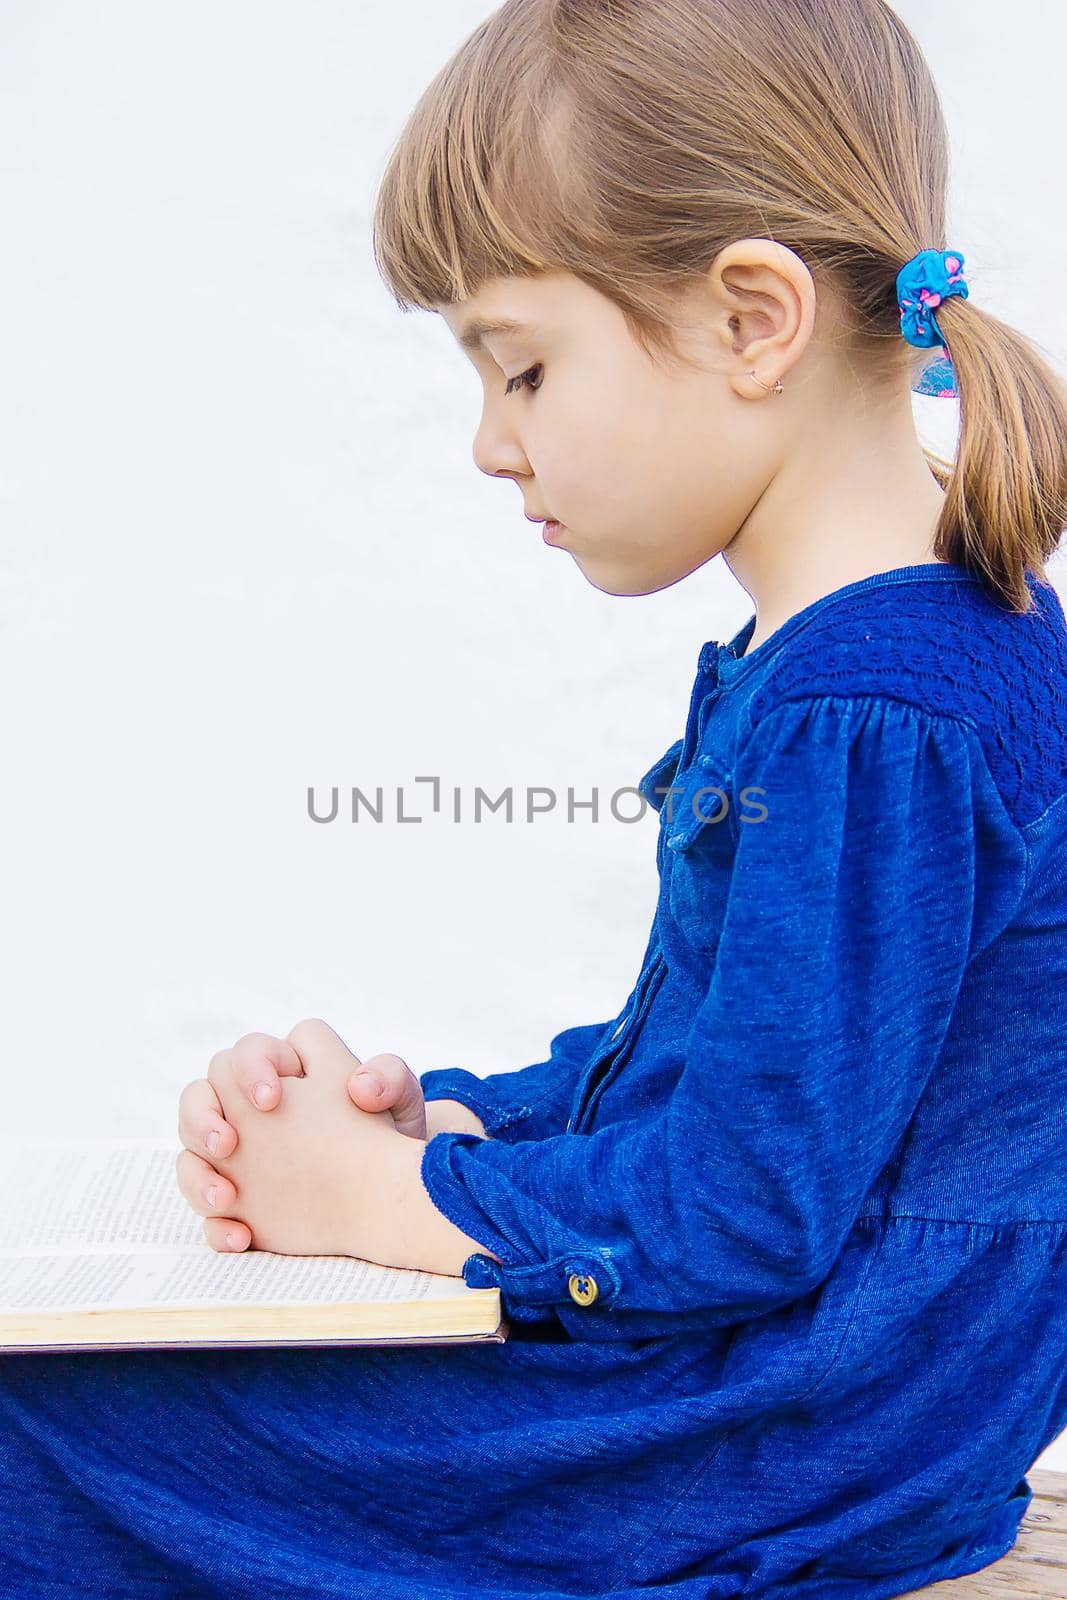 The child prays to God. Selective focus.